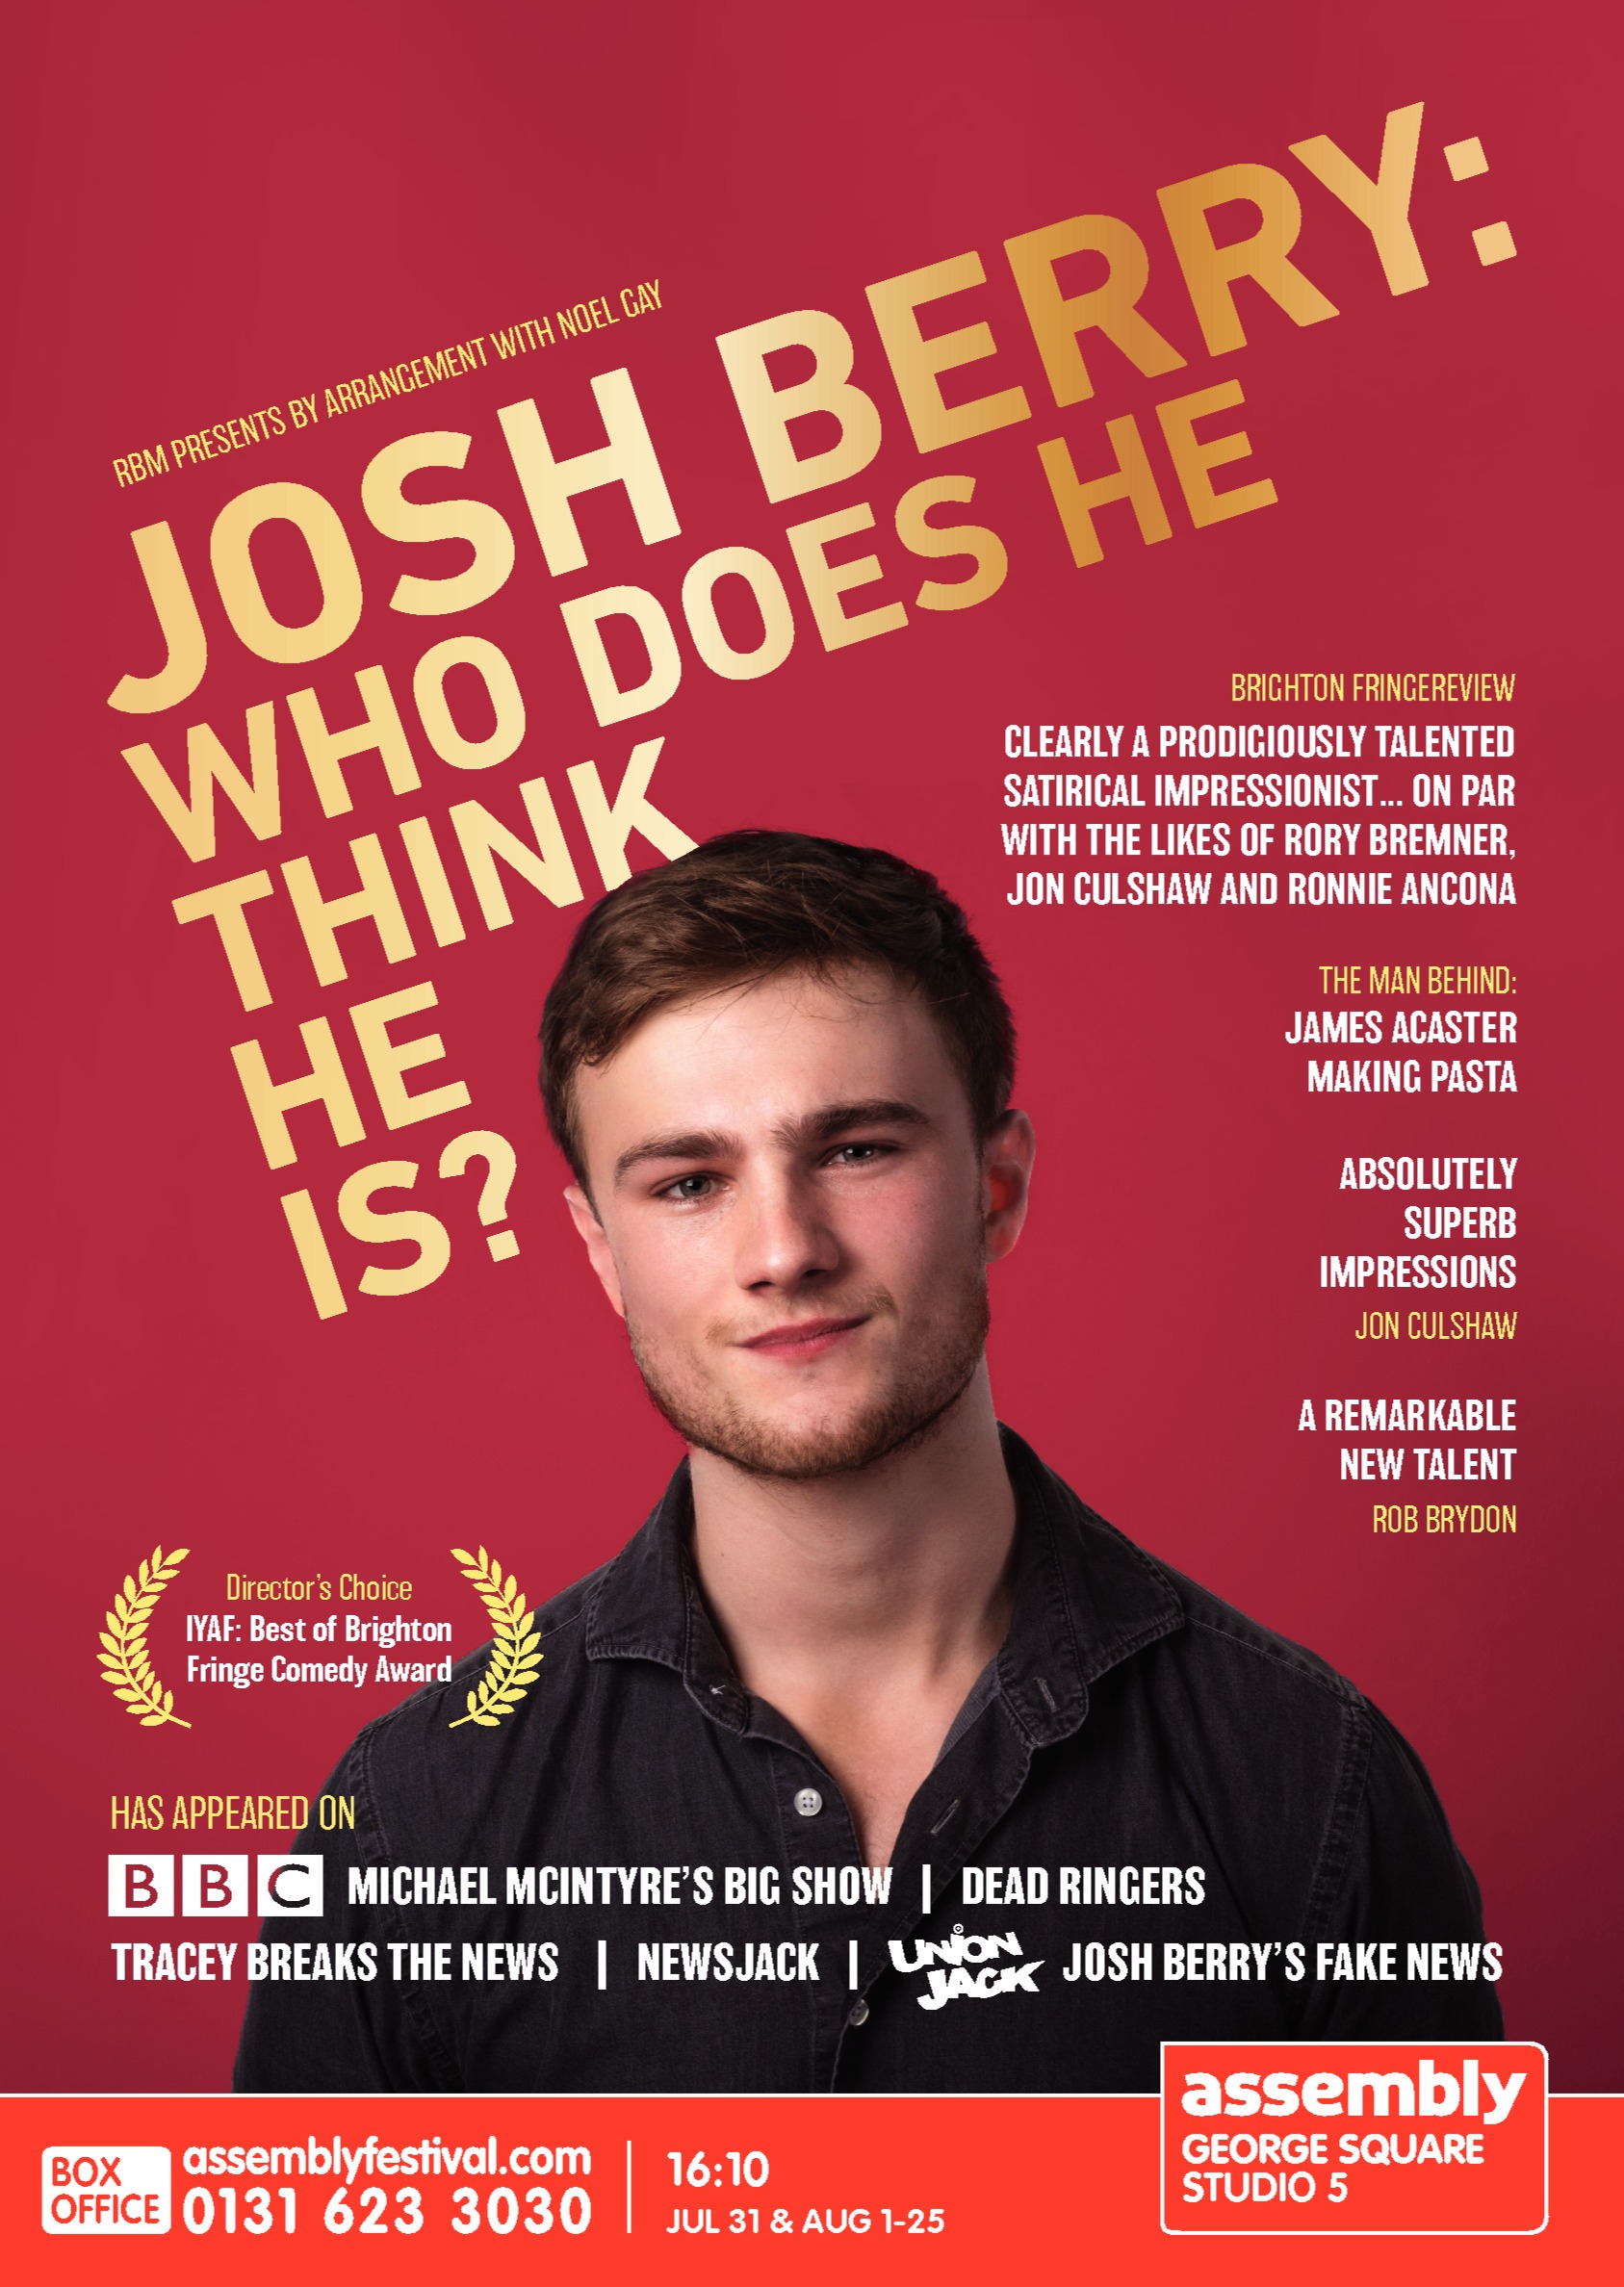 The poster for Josh Berry: Who Does He Think He Is?